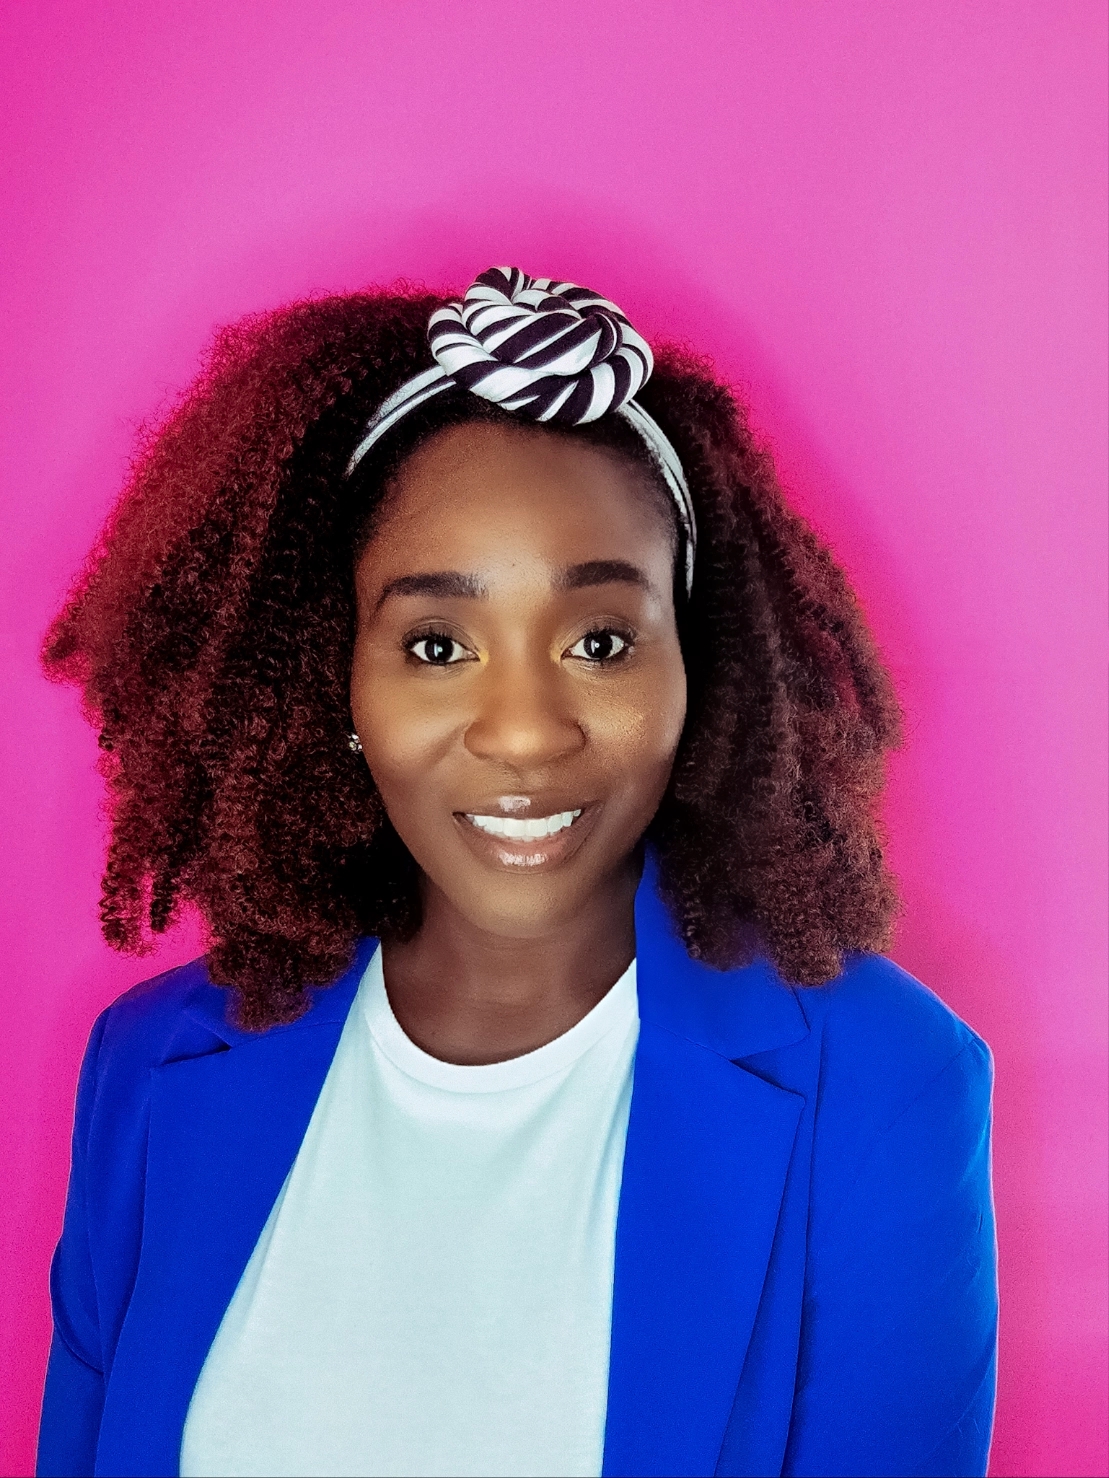 Image of Donnica smiling in a blue blazer against a hot pink background